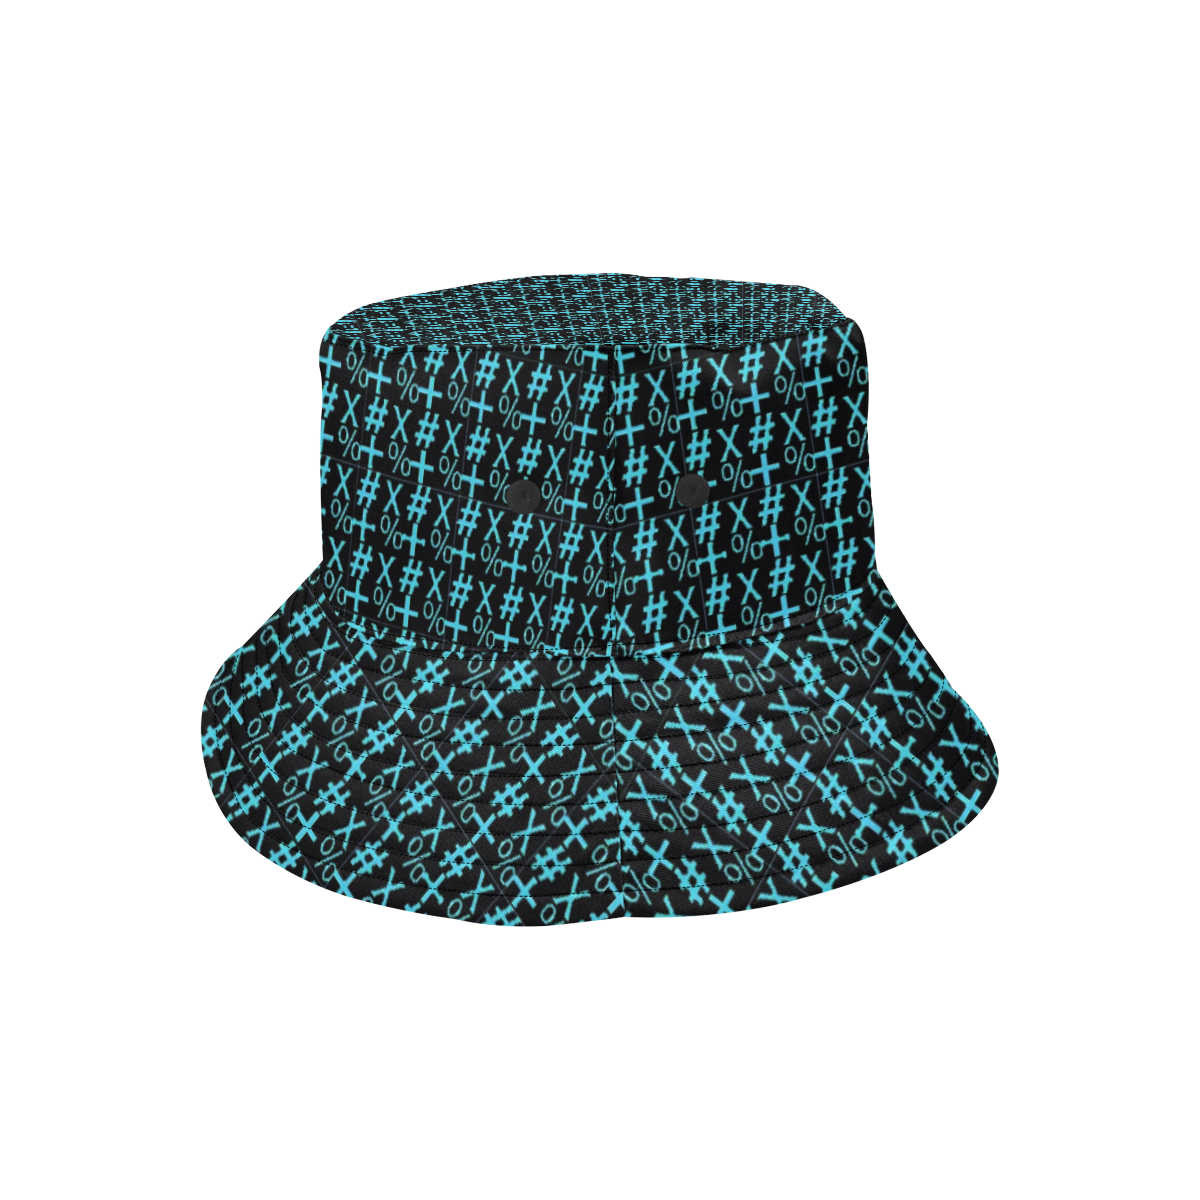 NUMBERS Collection Symbols Teal/Black All Over Print Bucket Hat for Men